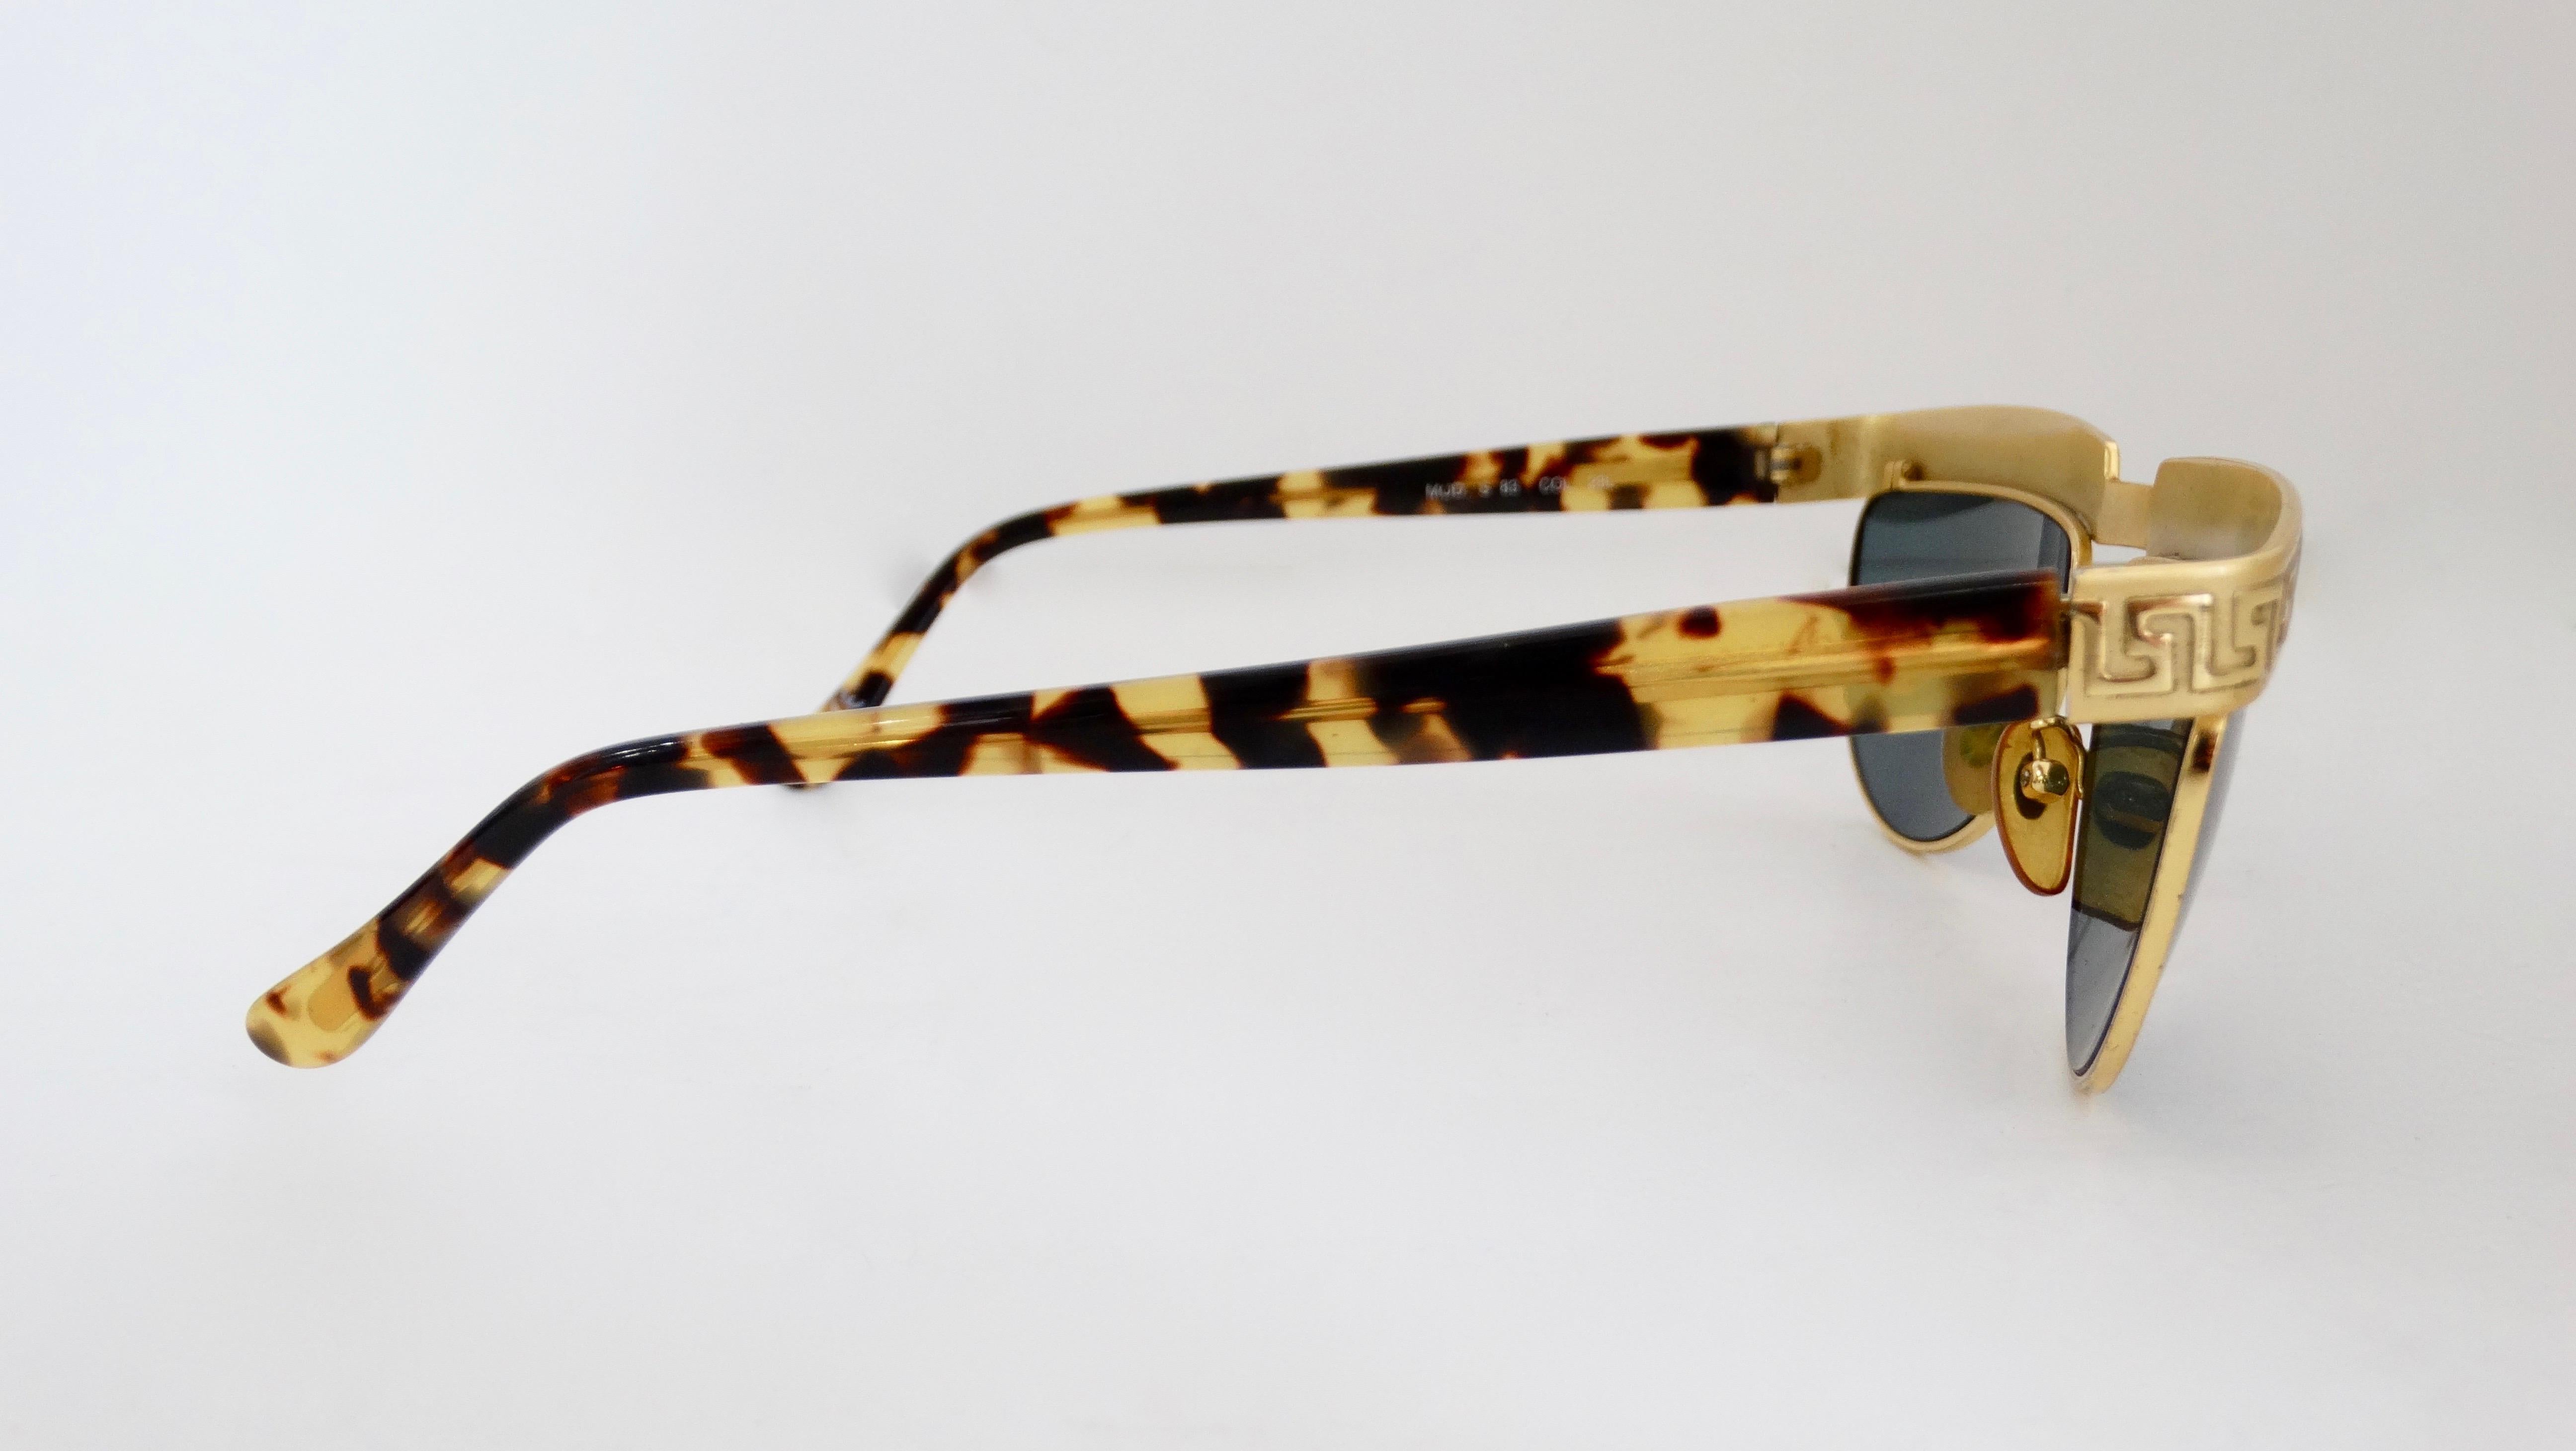 Add a statement to your sunglasses game with this amazing Gianni Versace sunglasses! Circa 1990s, these sunglasses feature a half circle shape with gold hardware, dark lenses and tortoise shell arms. Lining the gold bridge is the iconic Versace